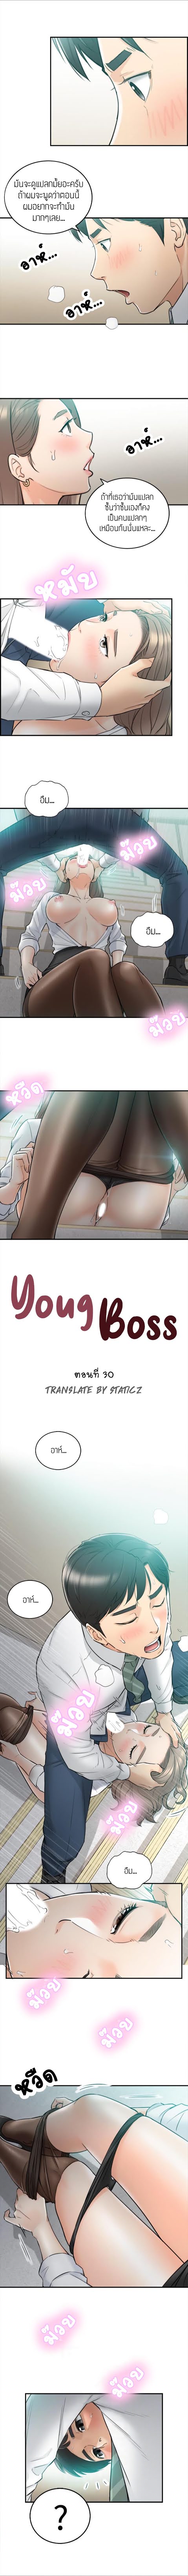 Young Boss - หน้า 2